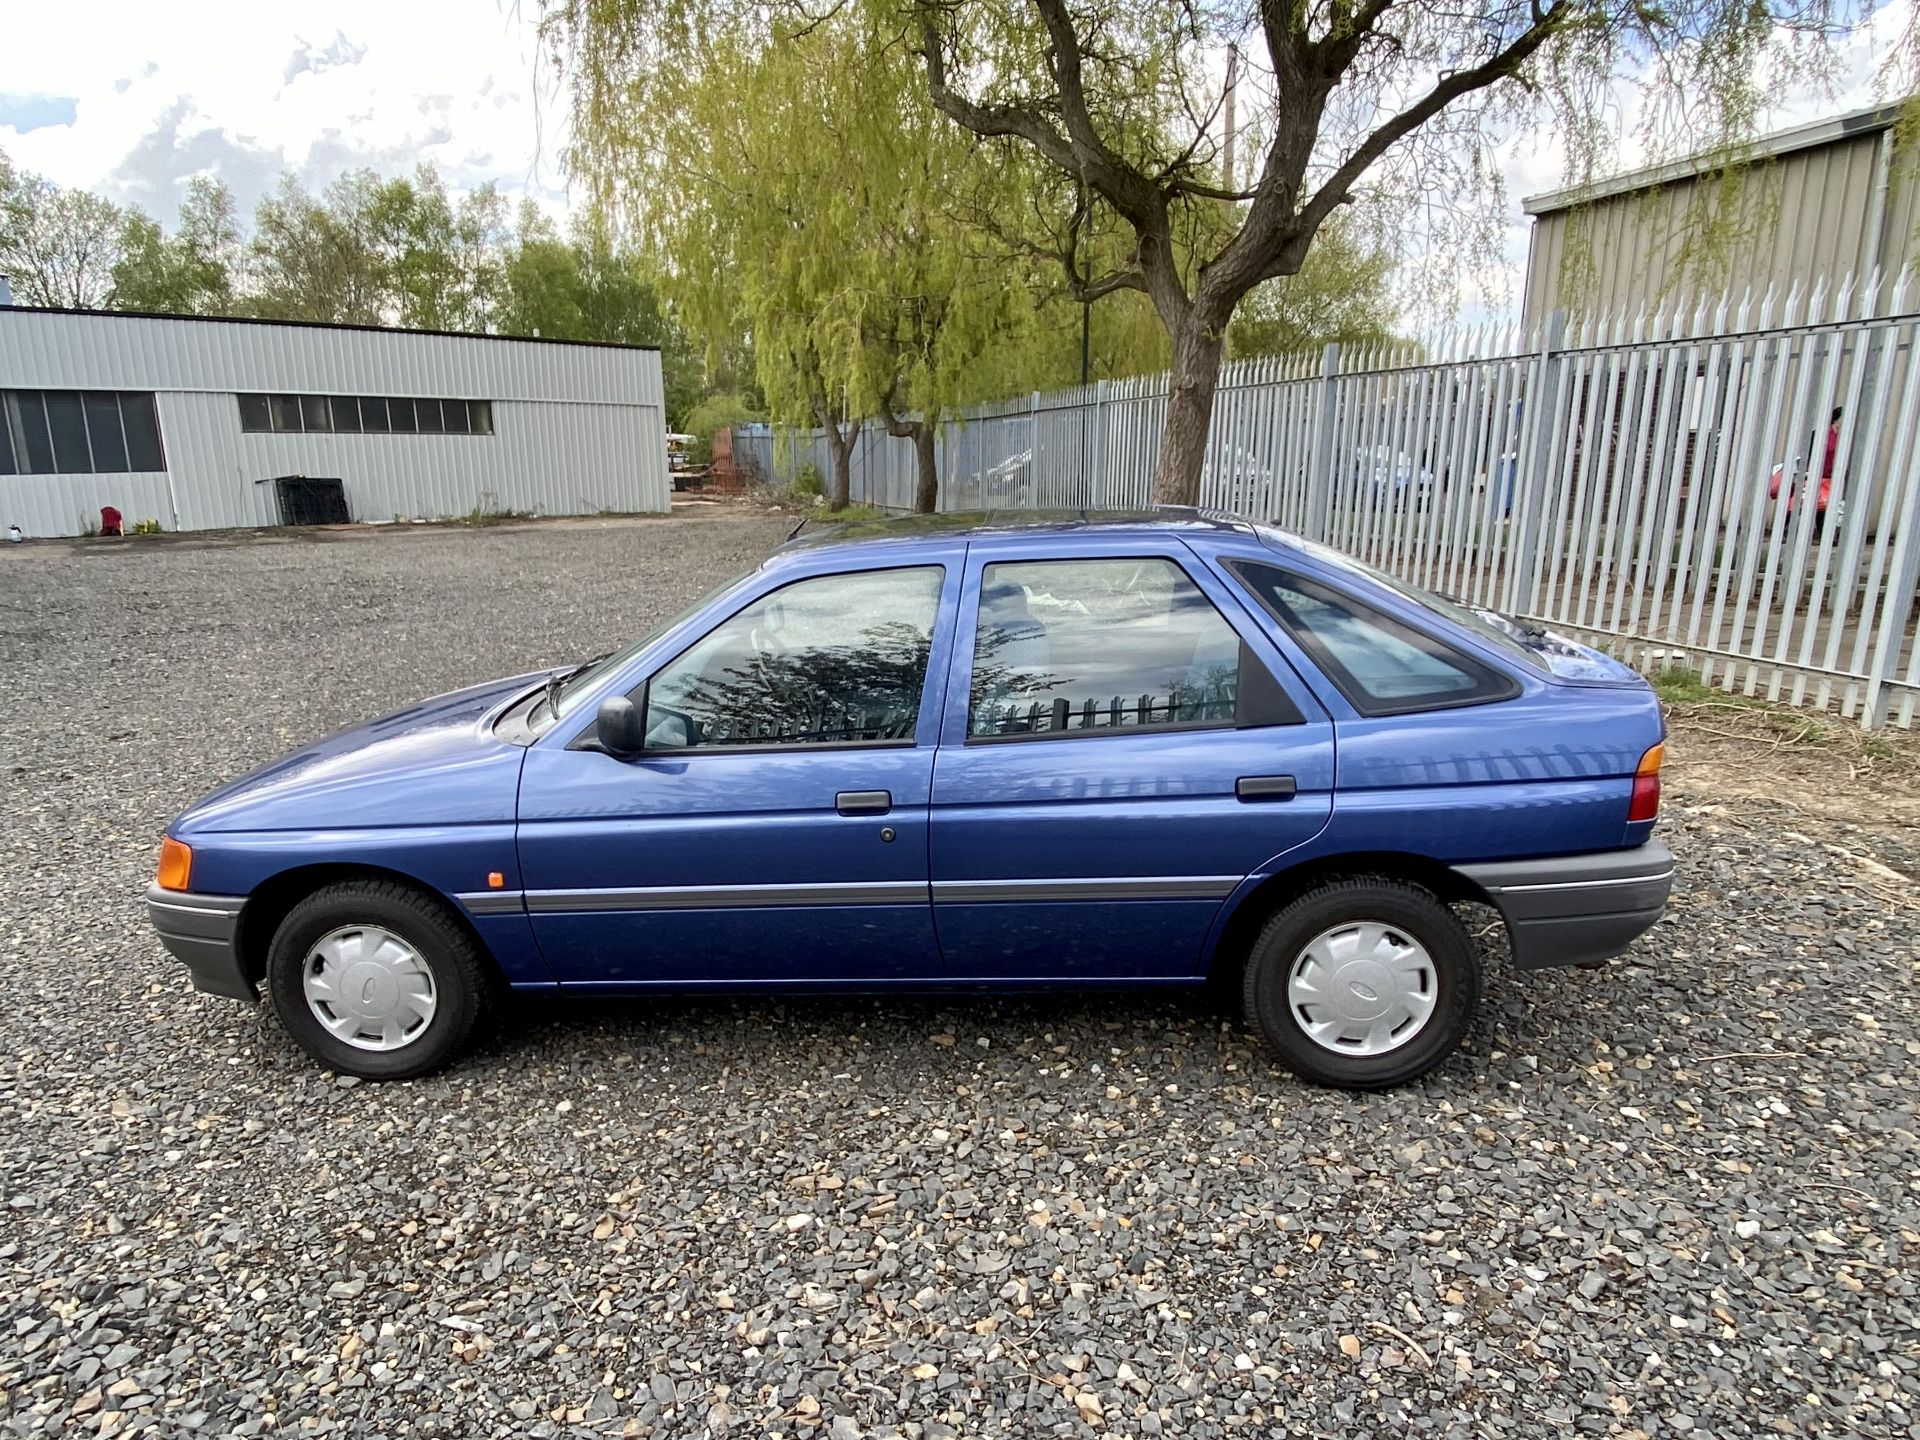 Ford Escort LX1.4 - Image 16 of 54